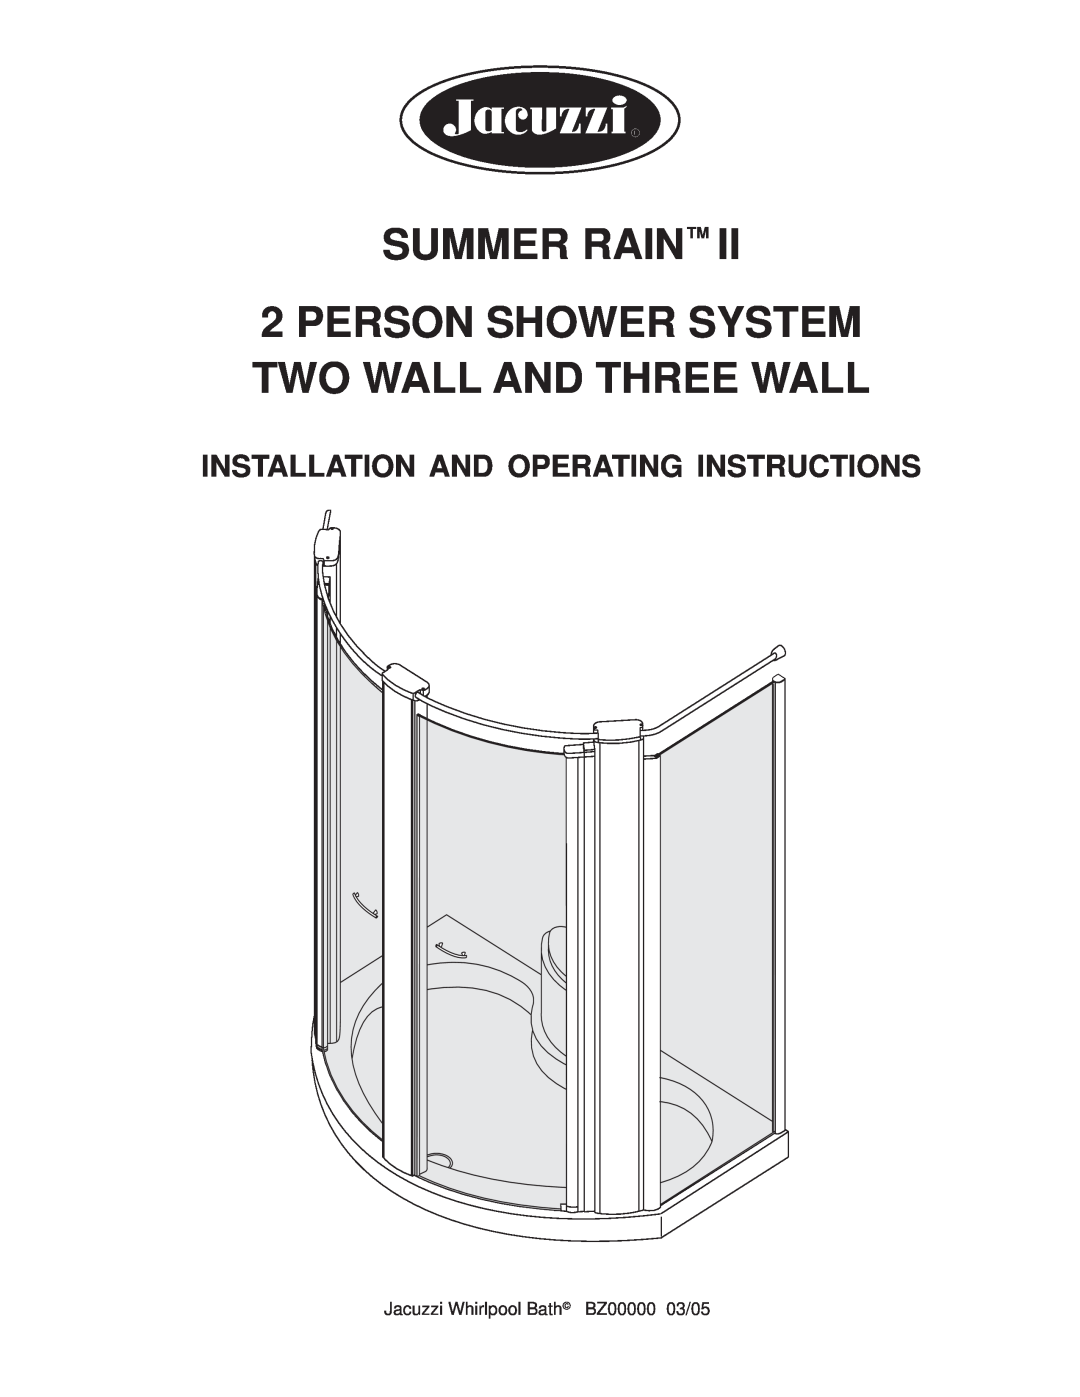 Jacuzzi BZ00000 operating instructions SUMMER RAIN 2 PERSON SHOWER SYSTEM TWO WALL AND THREE WALL 